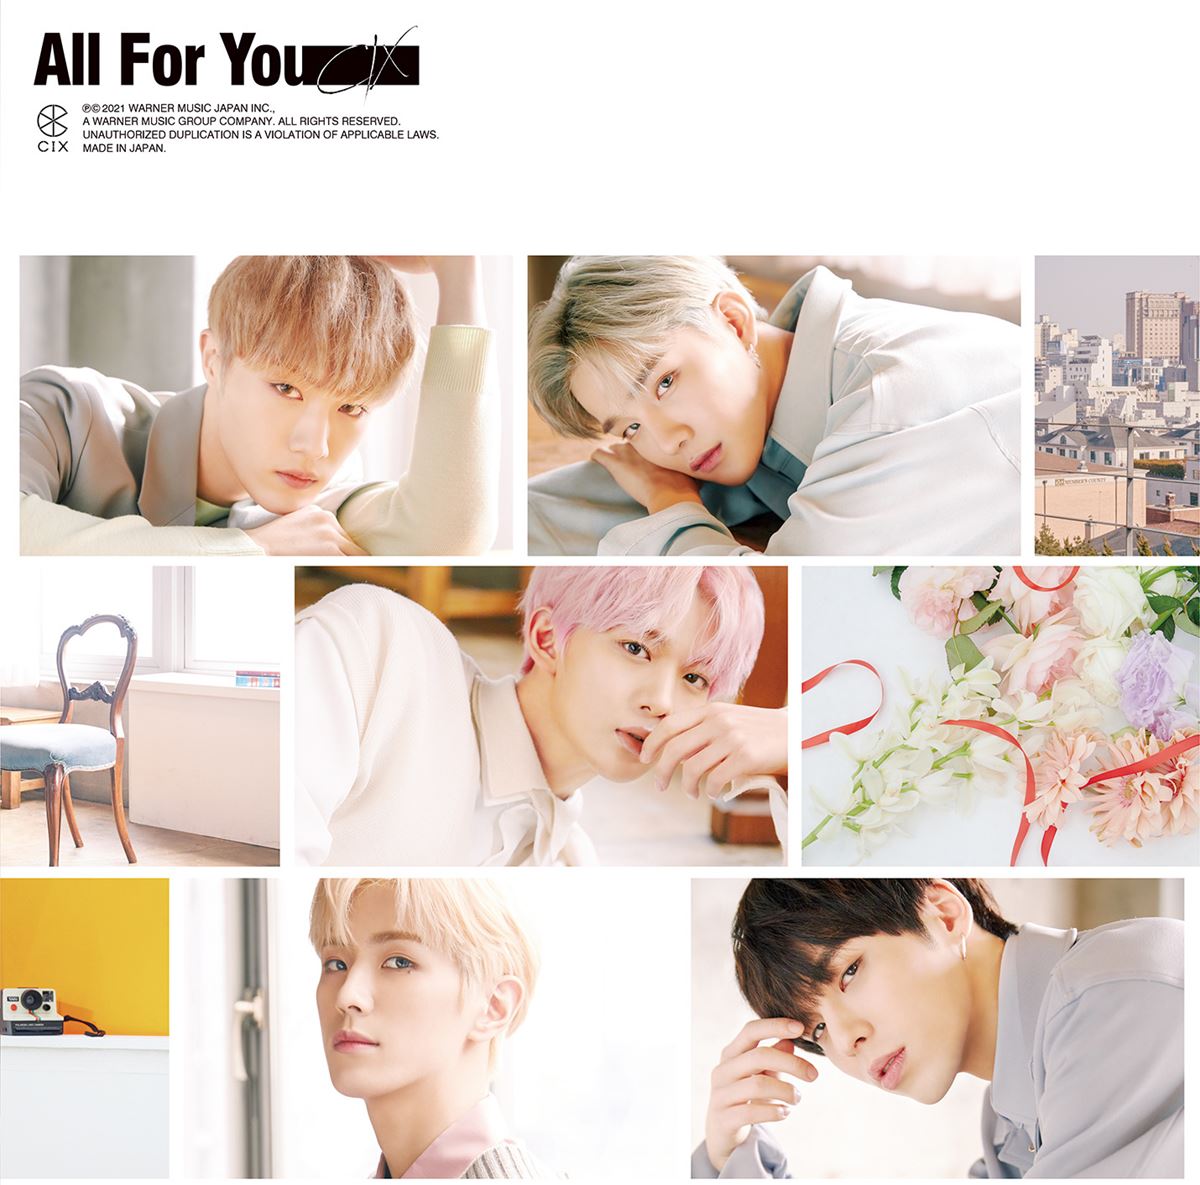 CIX『All For You』通常盤A ジャケット